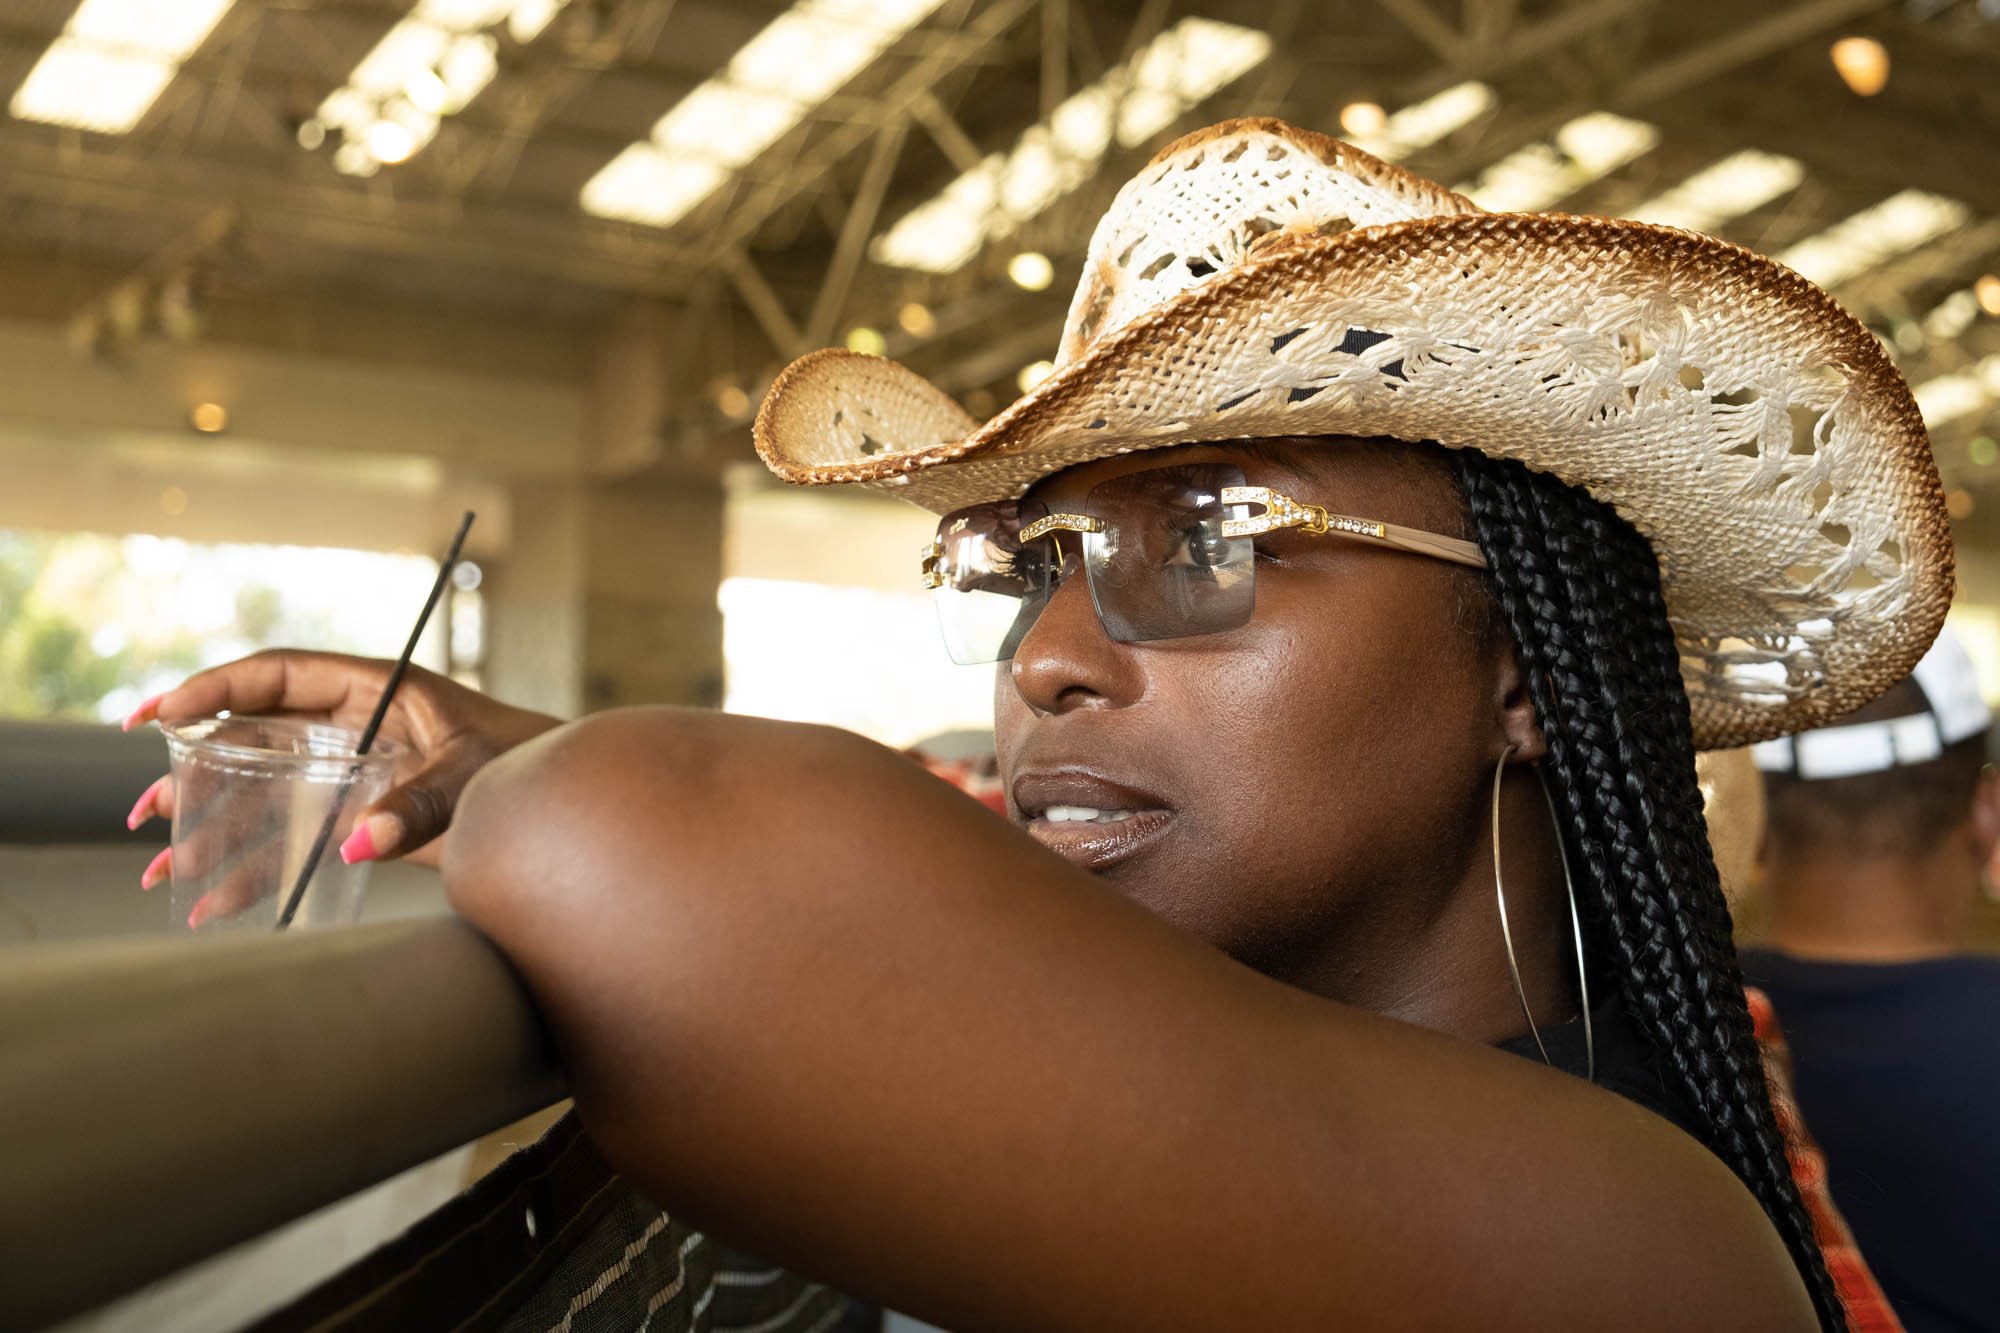  Shanita poses for a portrait at the Bill Pickett Rodeo on July 17, 2022. Her husband introduced her to the rodeo over 15 years ago and she’s attended every year since. In 2021 she lost her husband to COVID-19. She said it's difficult being at the ro